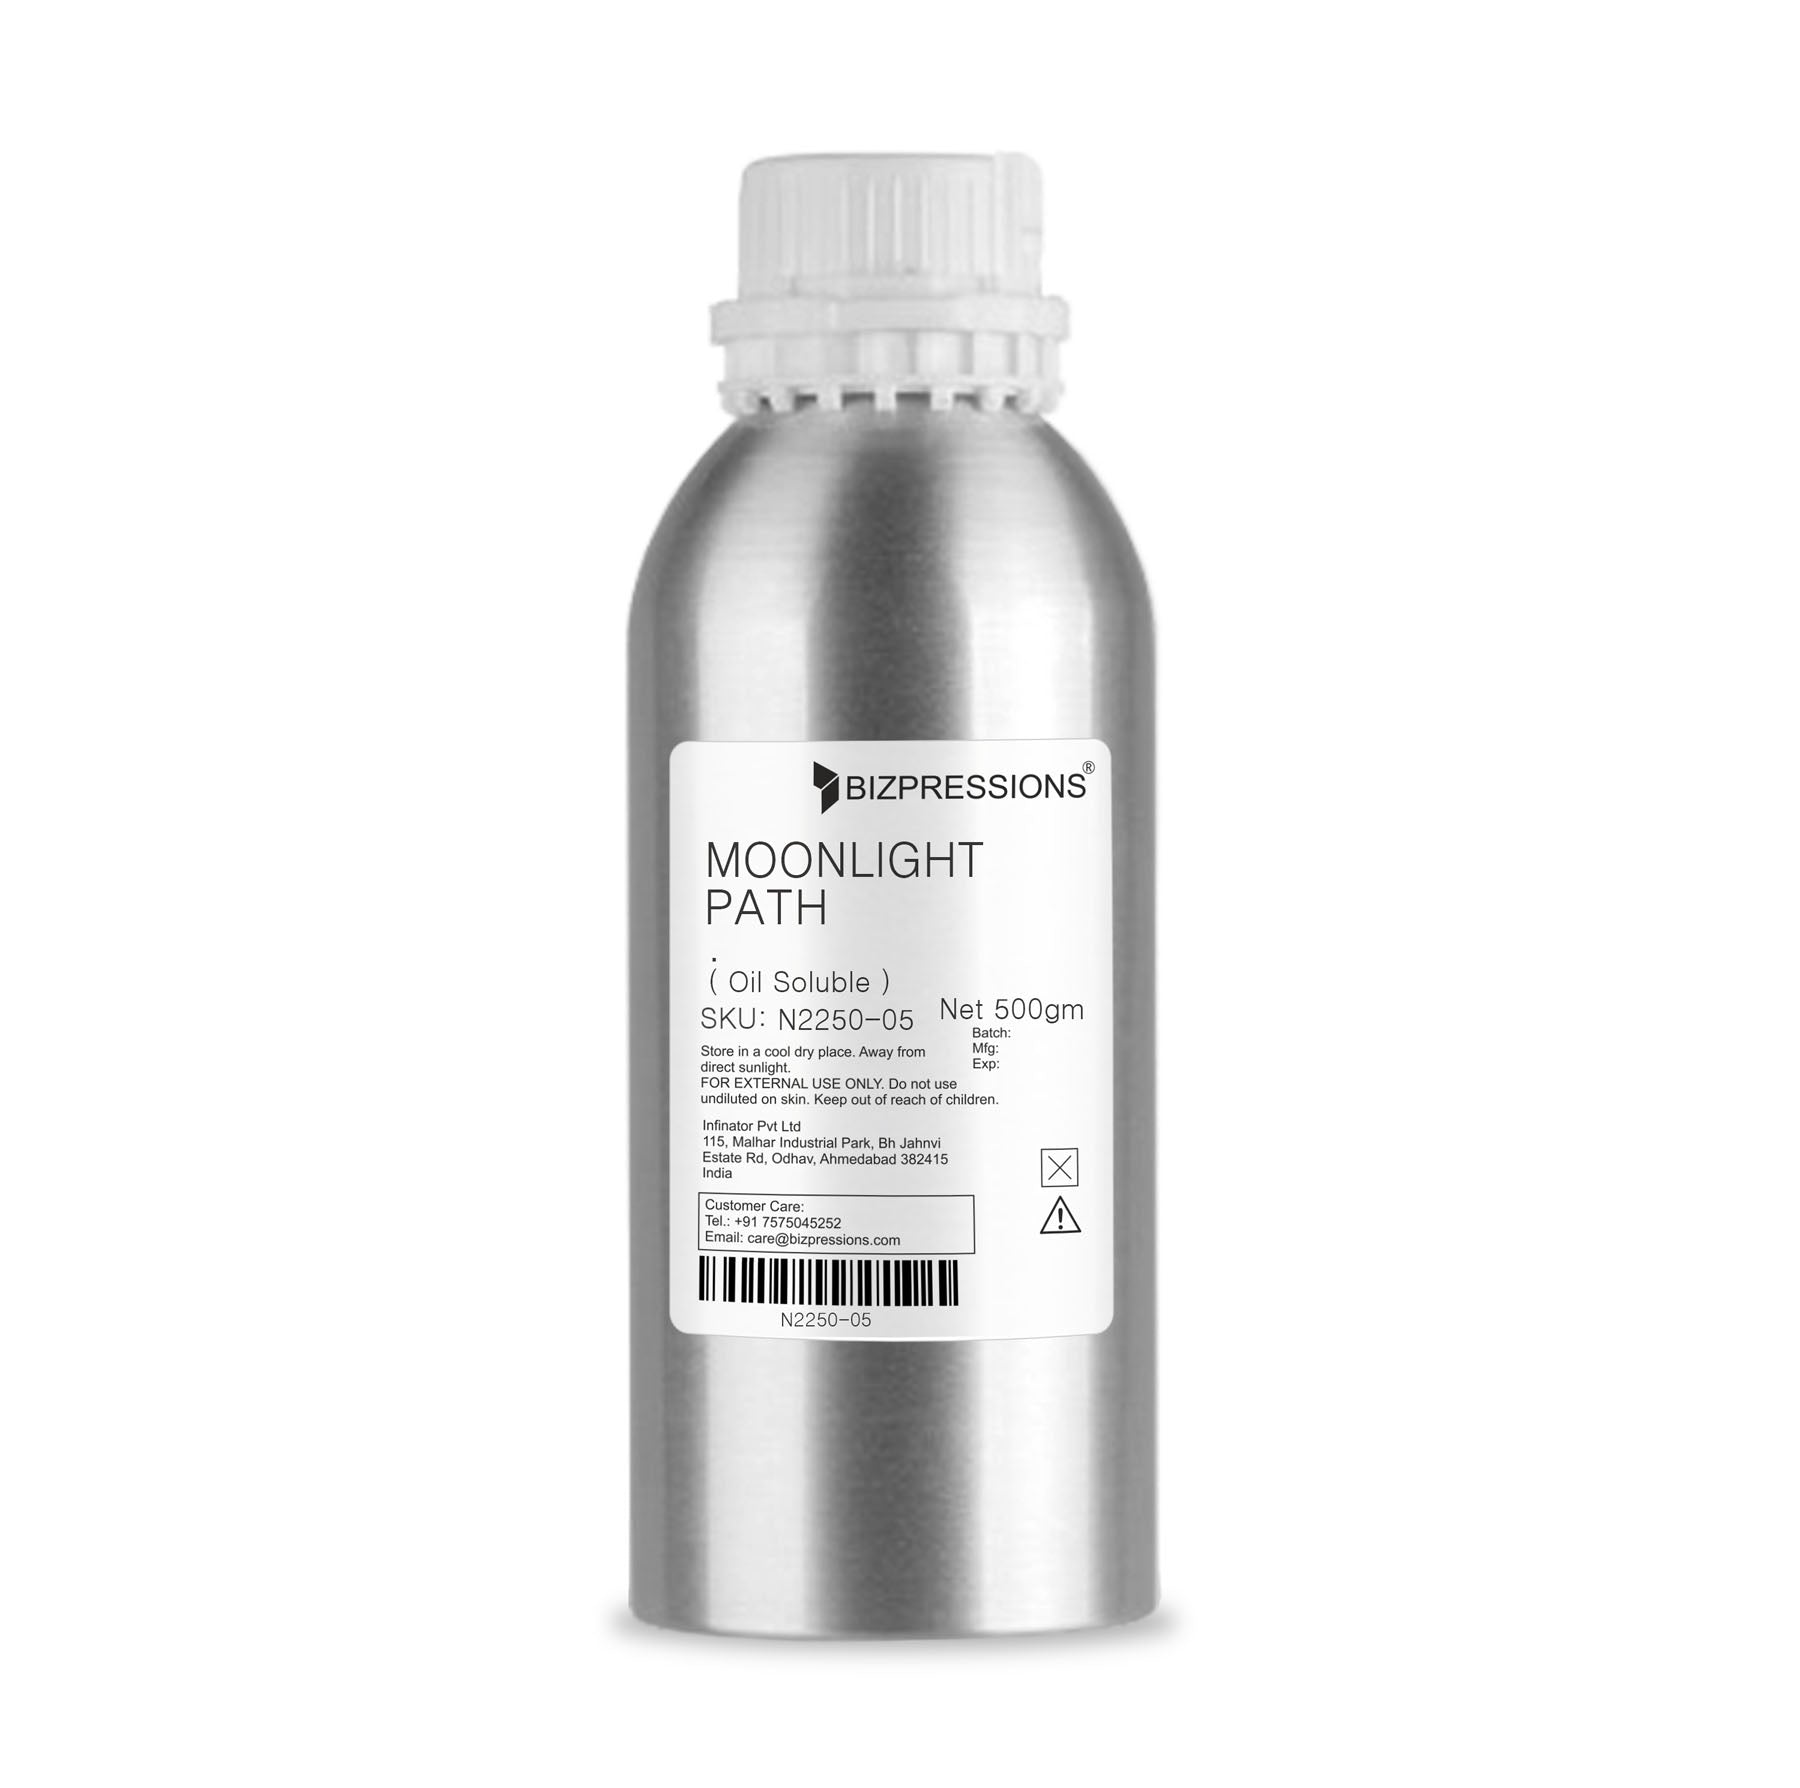 MOONLIGHT PATH - Fragrance ( Oil Soluble ) - 500 gm